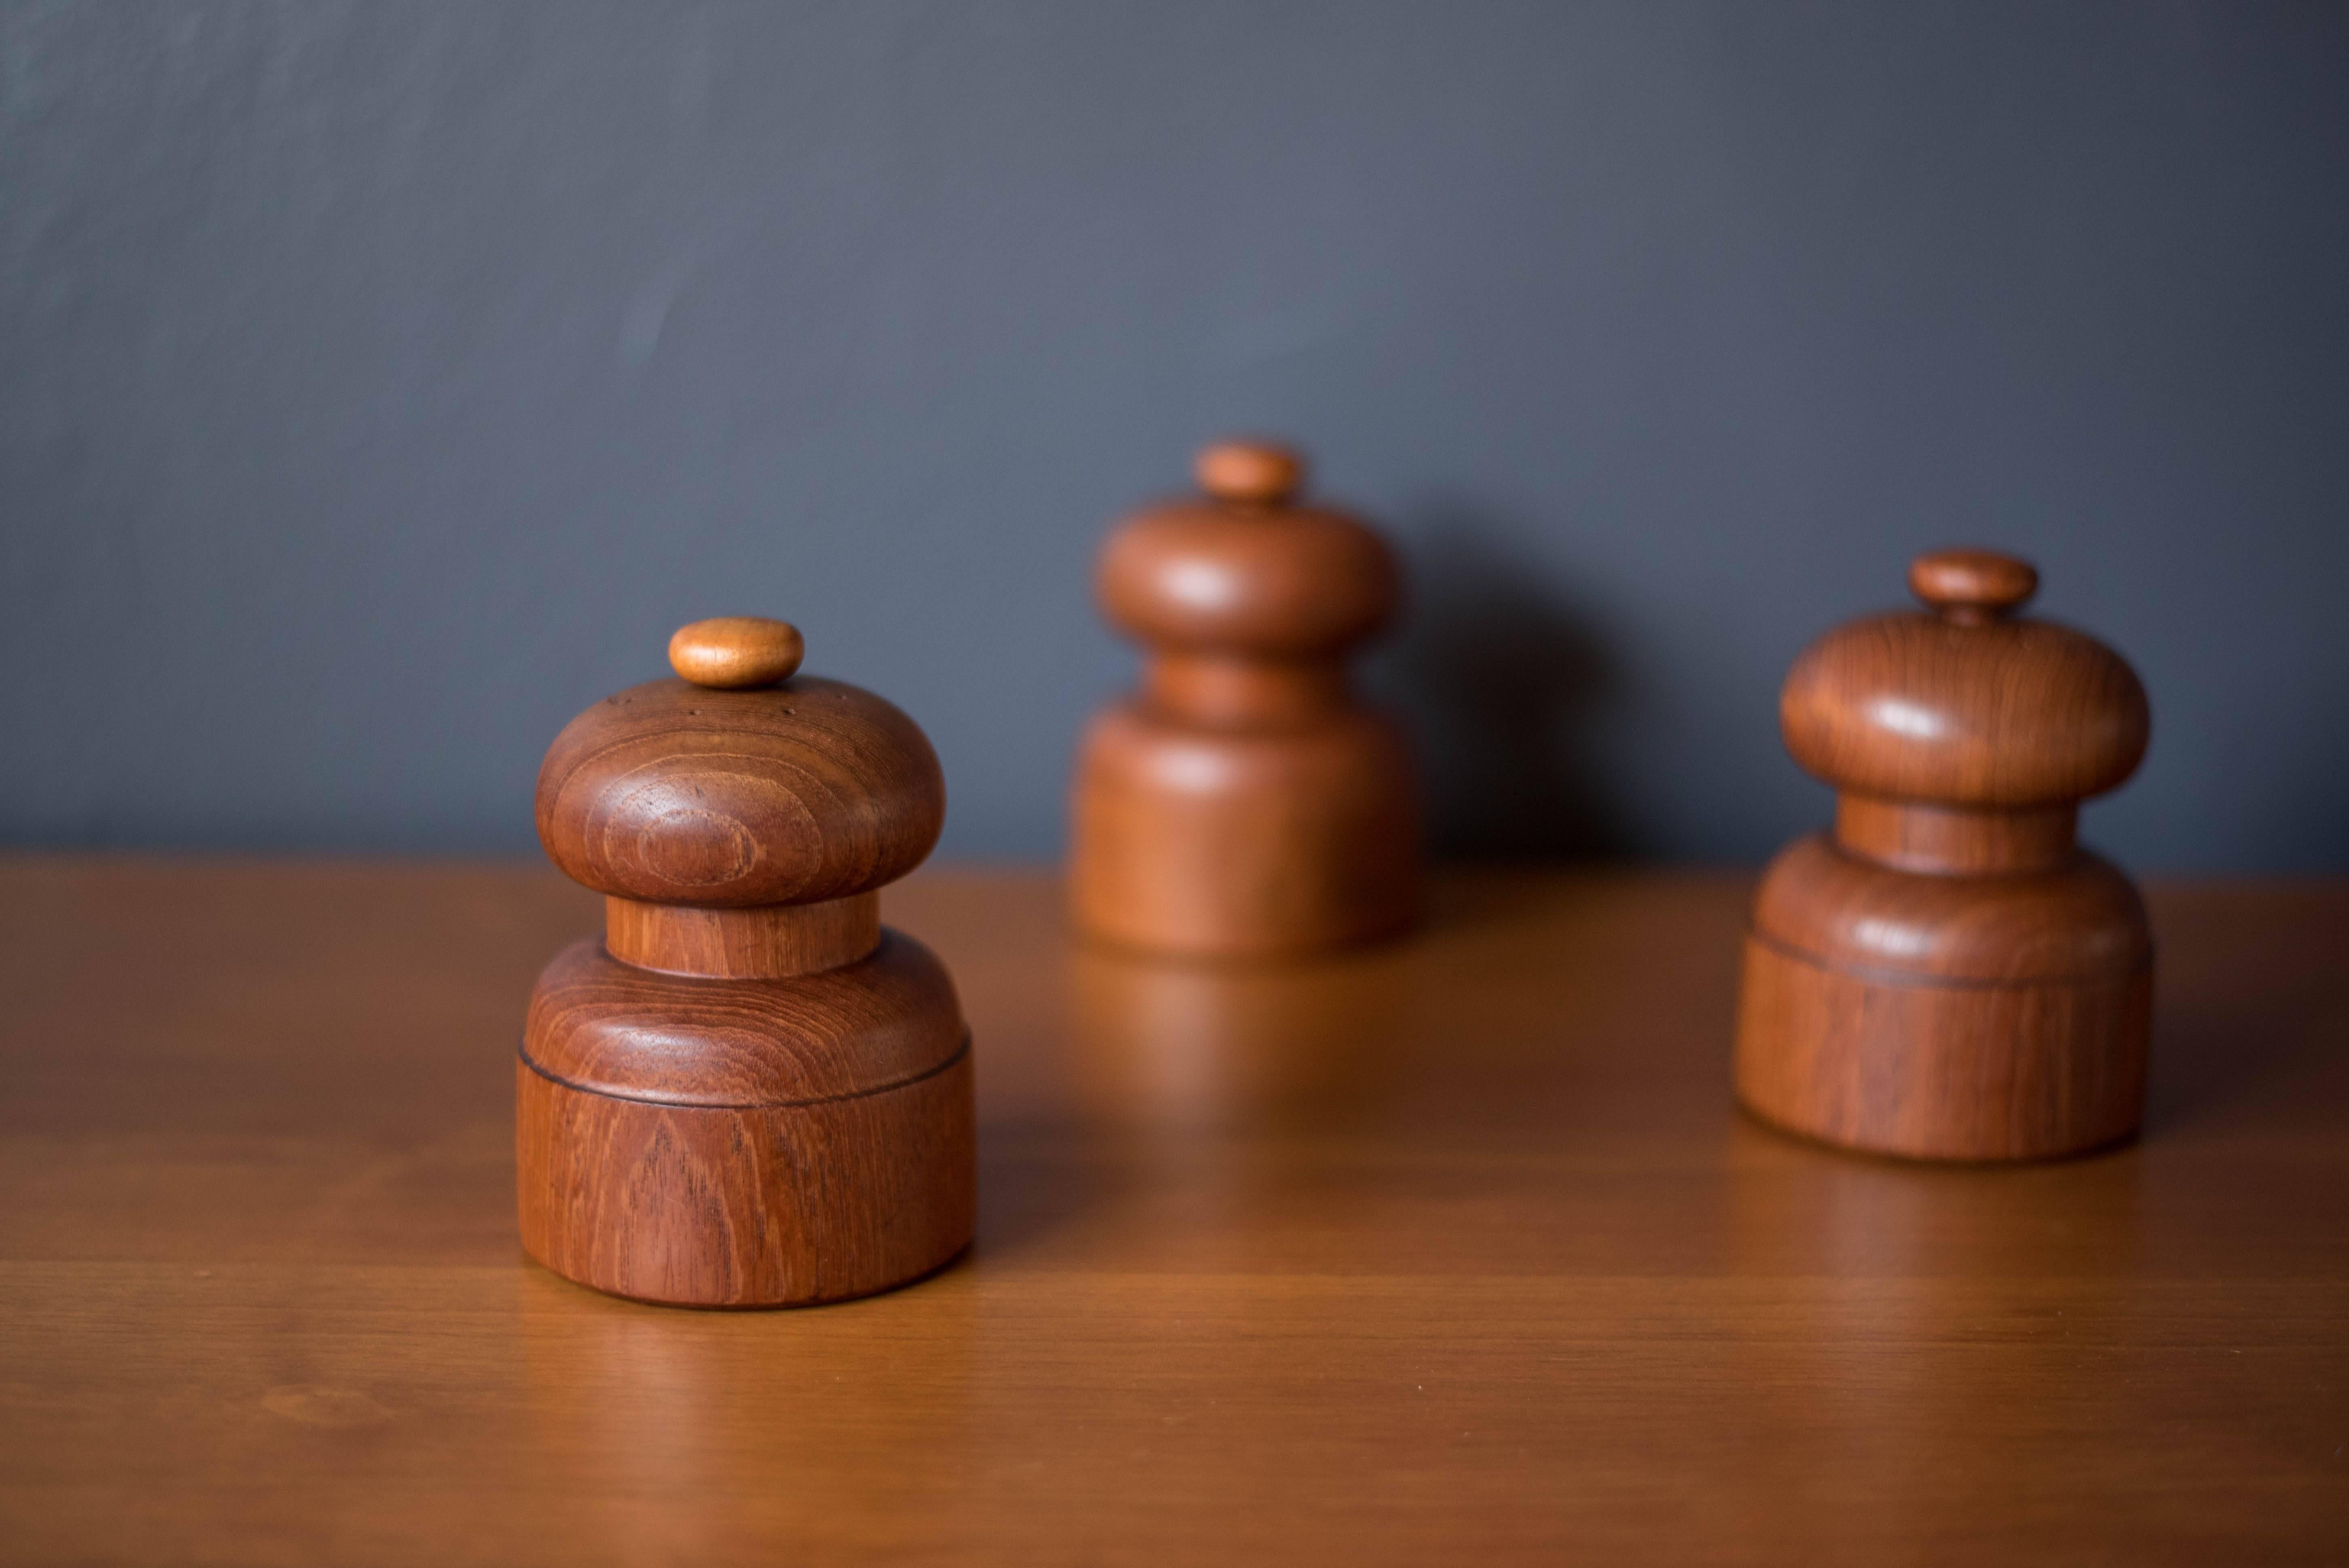 Mid-Century Modern collectible pepper grinders designed by Jens Quistgaard for Dansk. Each piece is made of teak with a salt dispenser on the top. Marked Denmark on the bottom. Price is for each, one left.